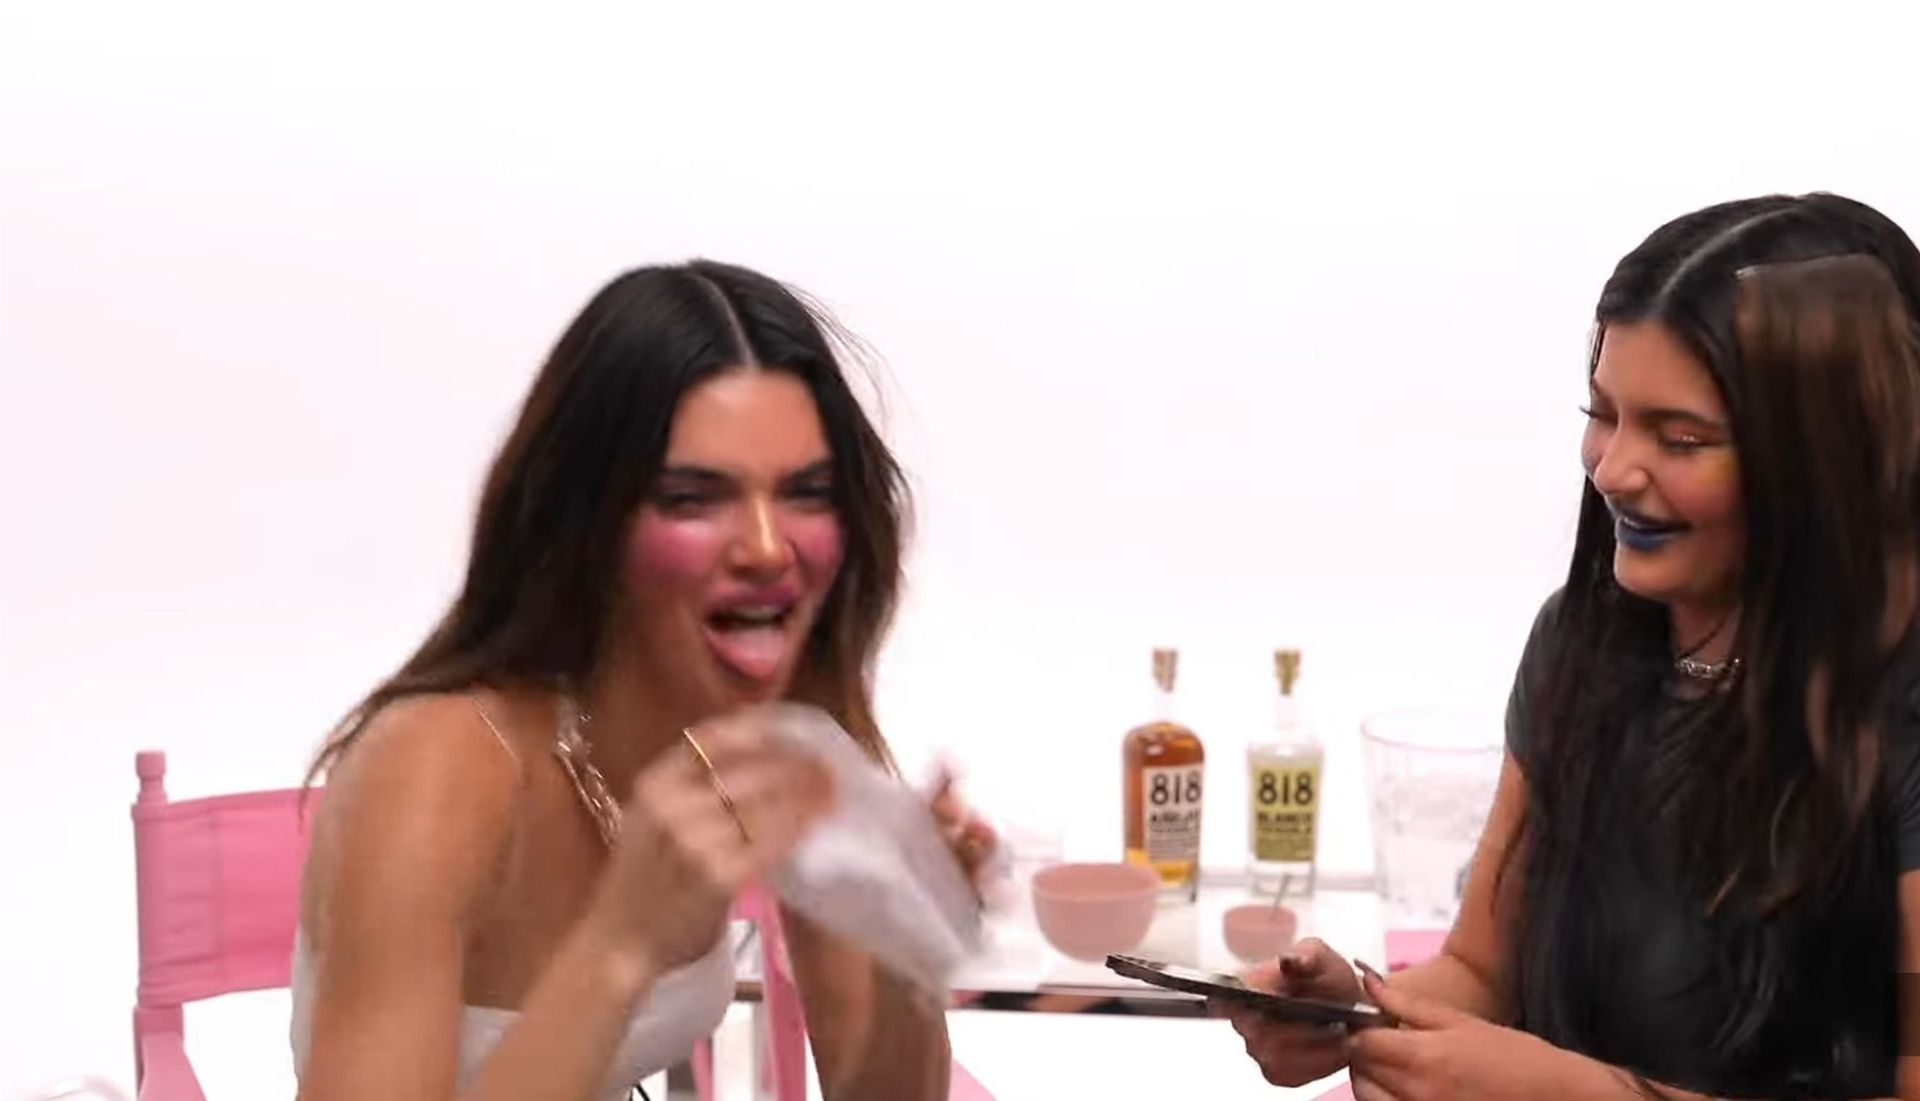 Kendall and Kylie Jenner Sexy - Get Ready With Me (92 Pics + Video)